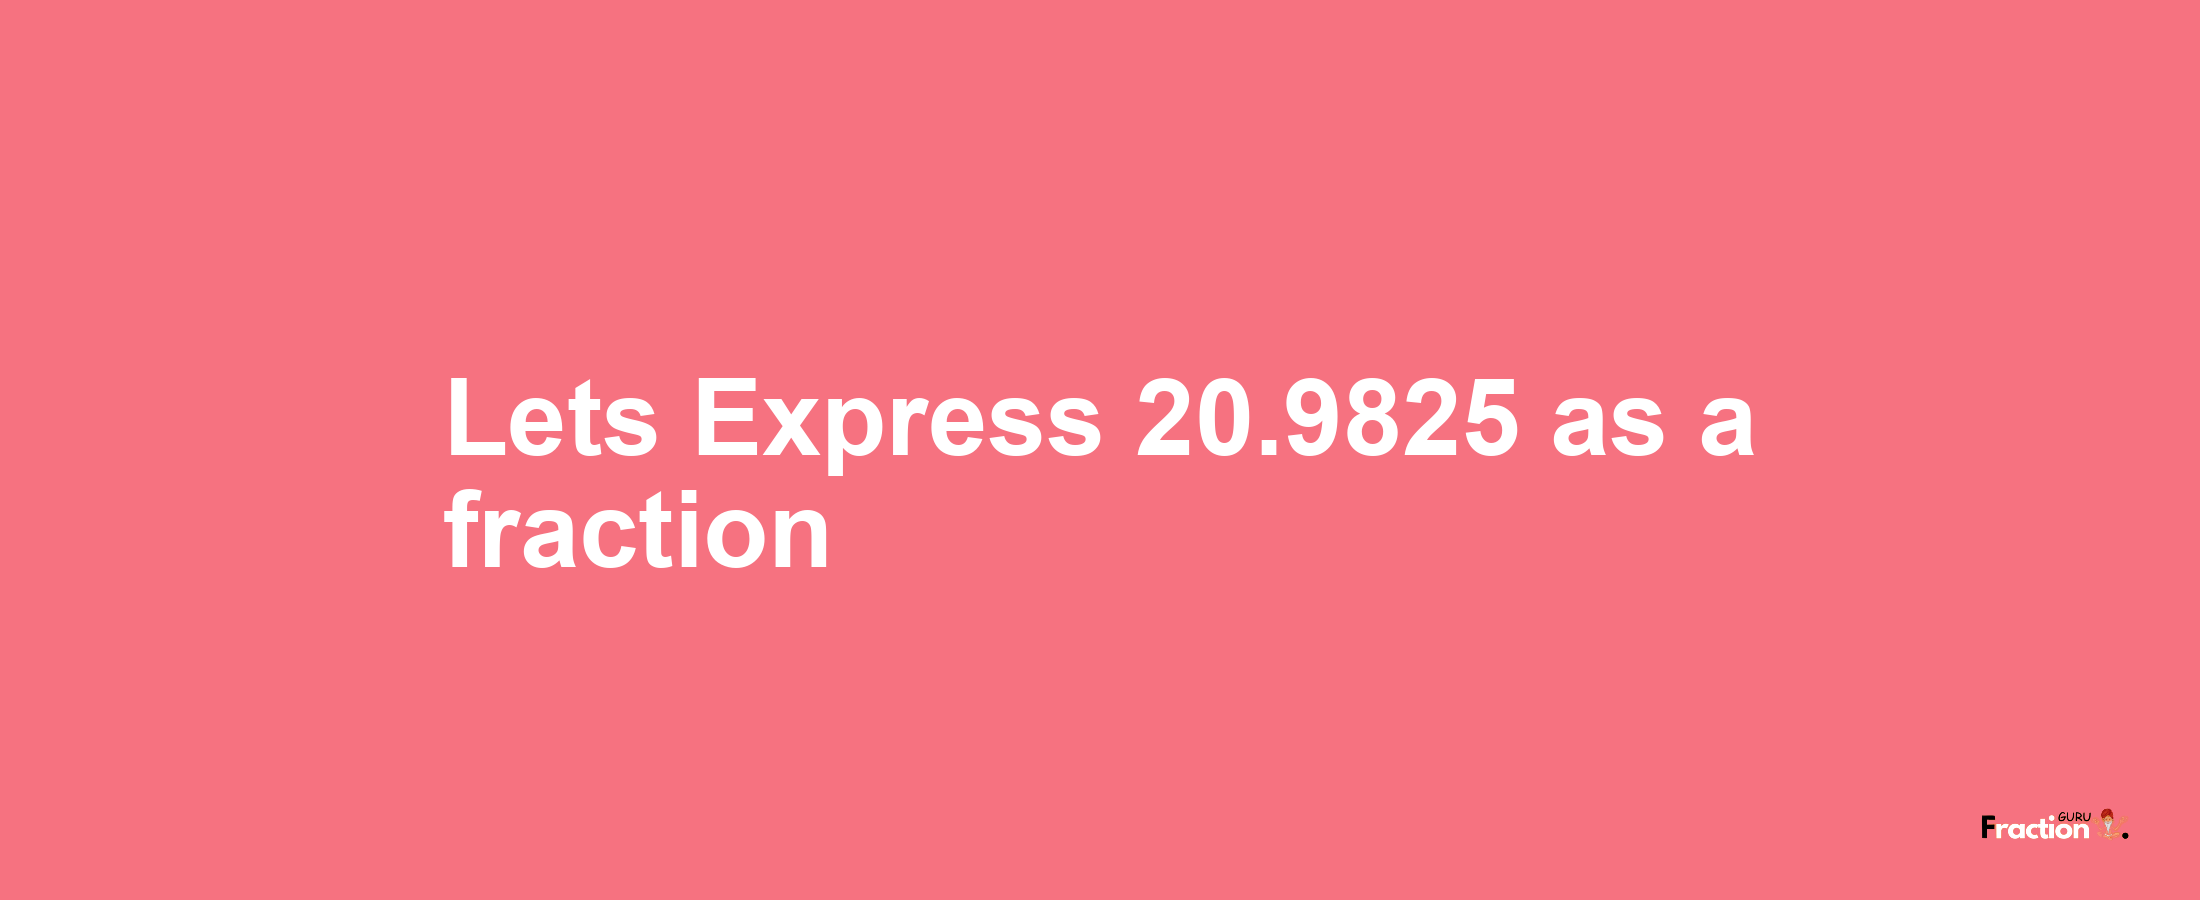 Lets Express 20.9825 as afraction